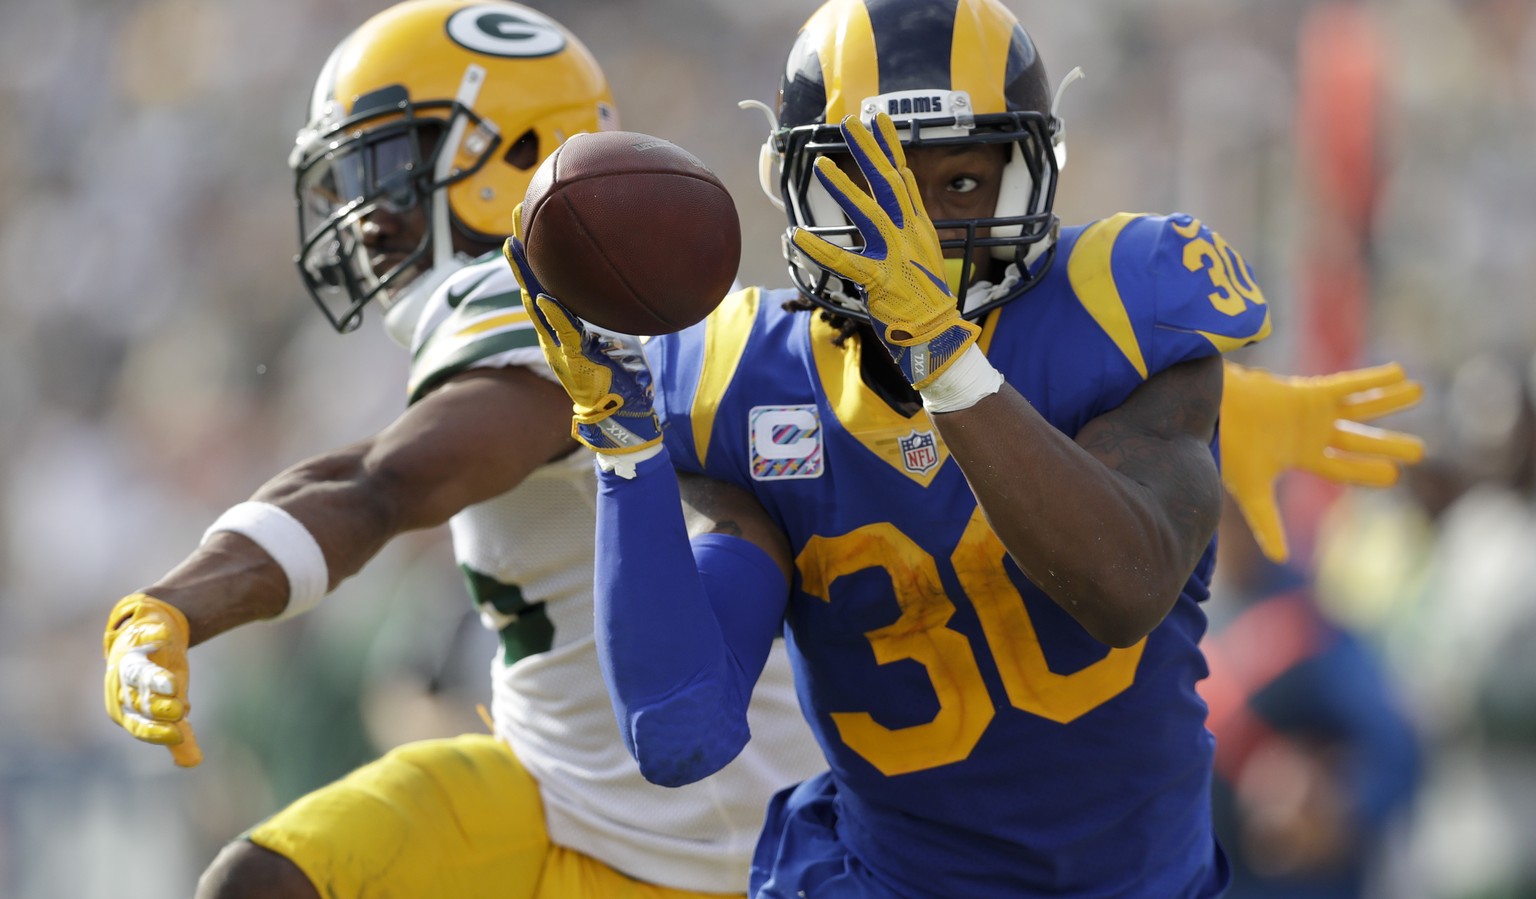 Los Angeles Rams running back Todd Gurley makes a catch as Green Bay Packers defensive back Jermaine Whitehead defends during the first half of an NFL football game, Sunday, Oct. 28, 2018, in Los Ange ...